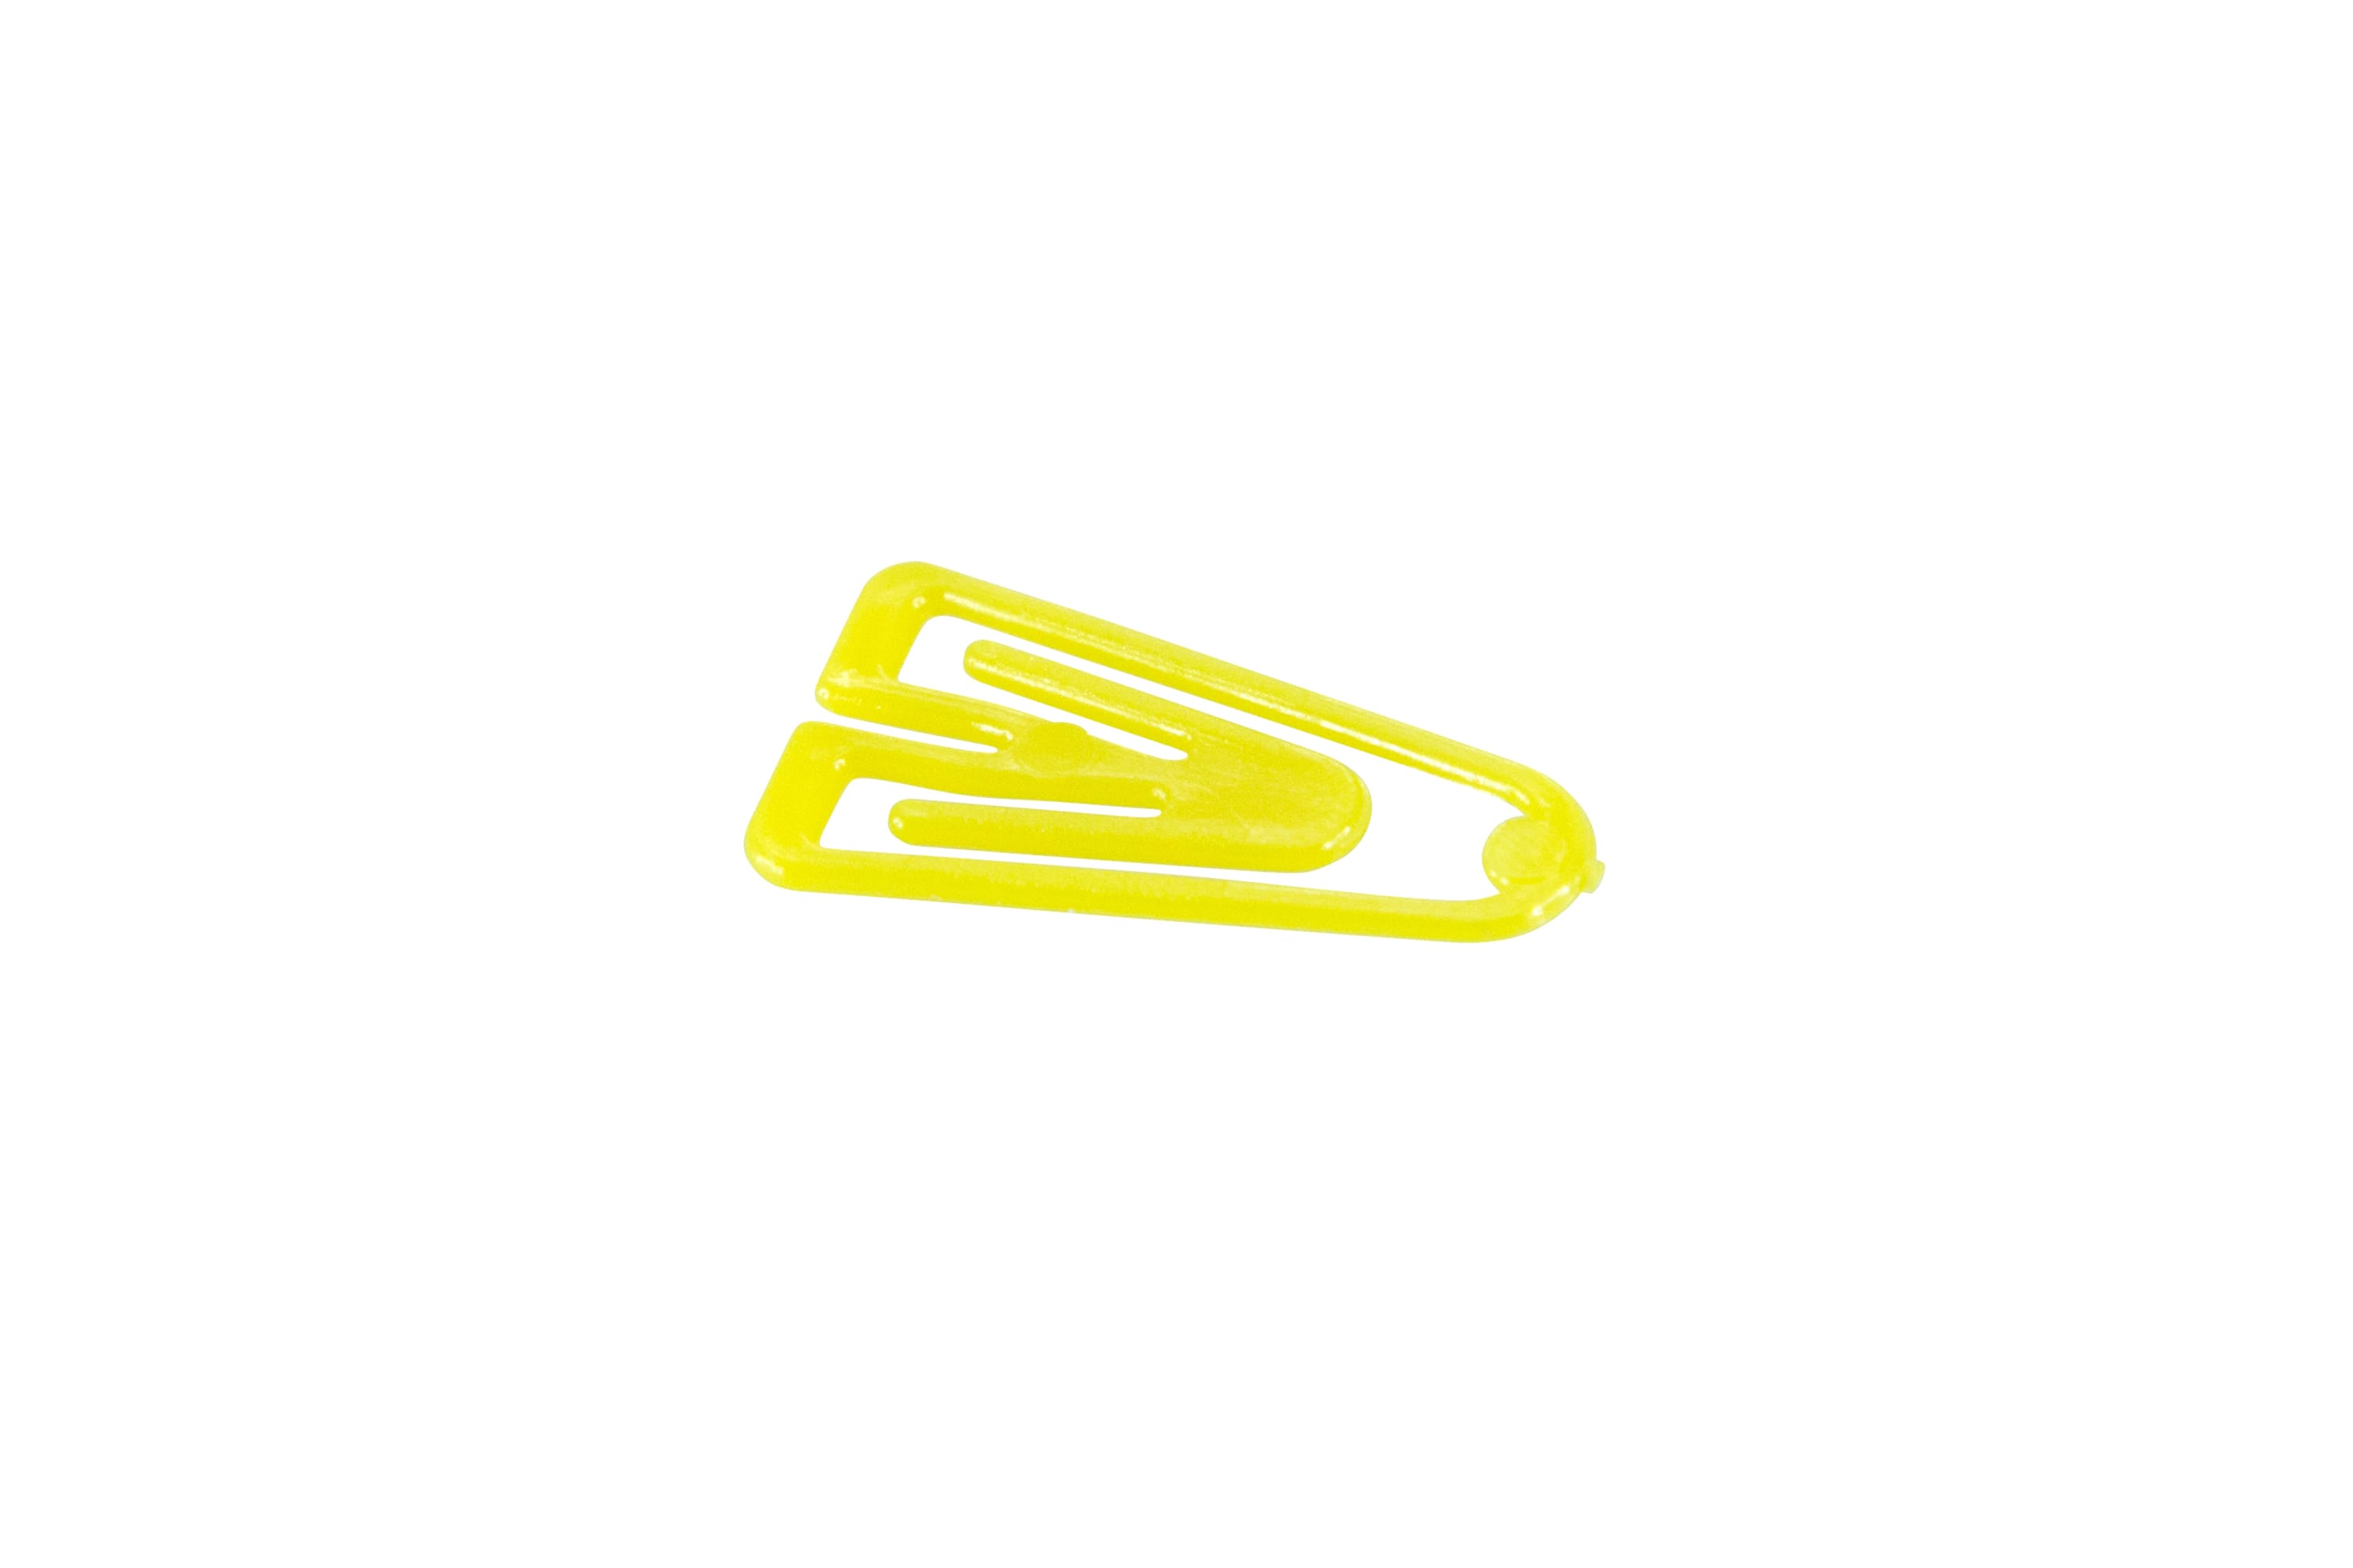 Plastiklips Paper Clips Small Size 500 Pack ASSORTED Colors (LP-4200)